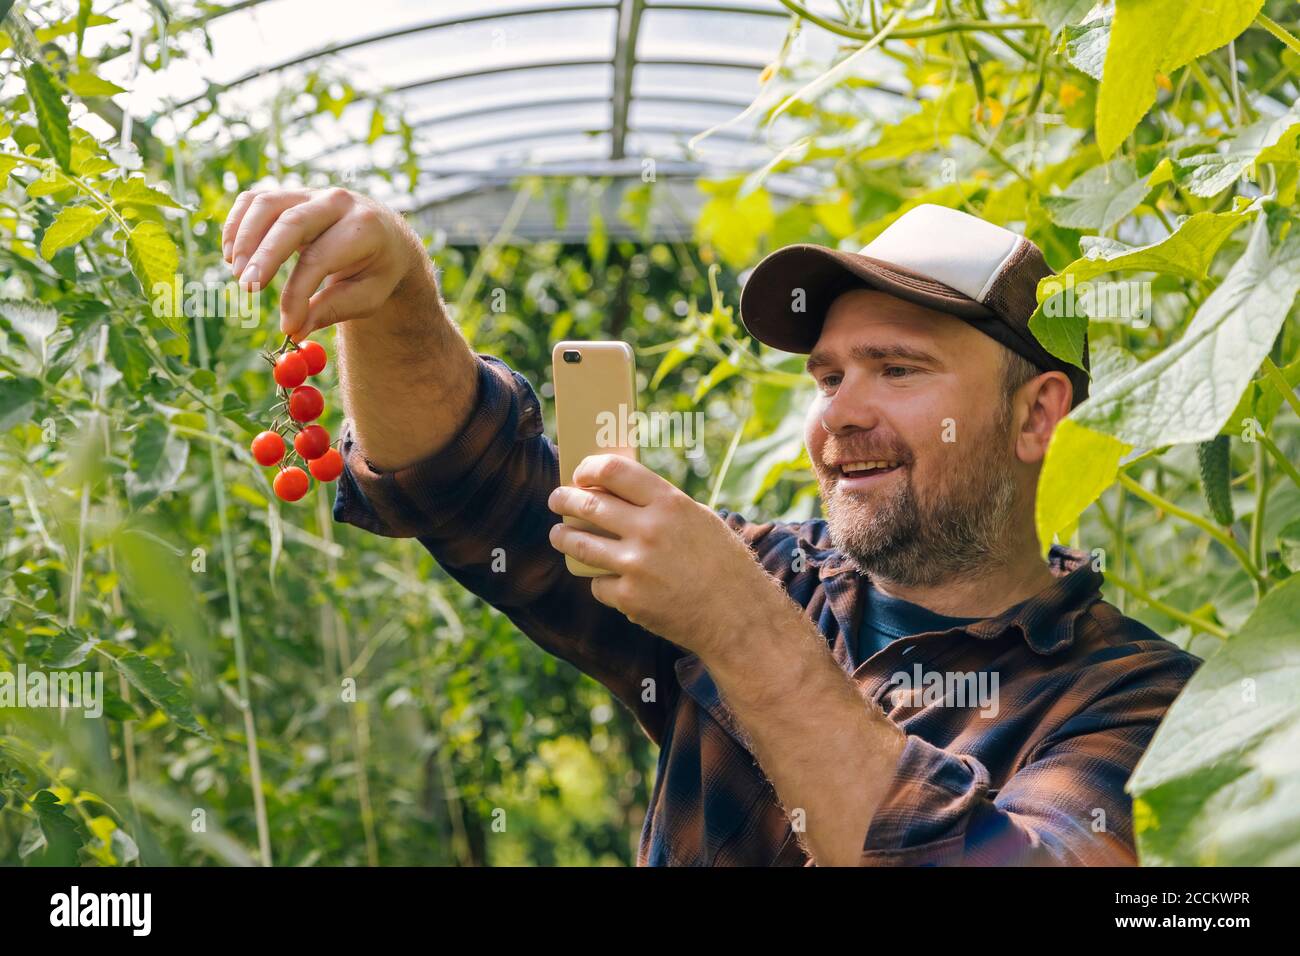 Smiling farmer holding harvested tomatos and mobile phone Stock Photo